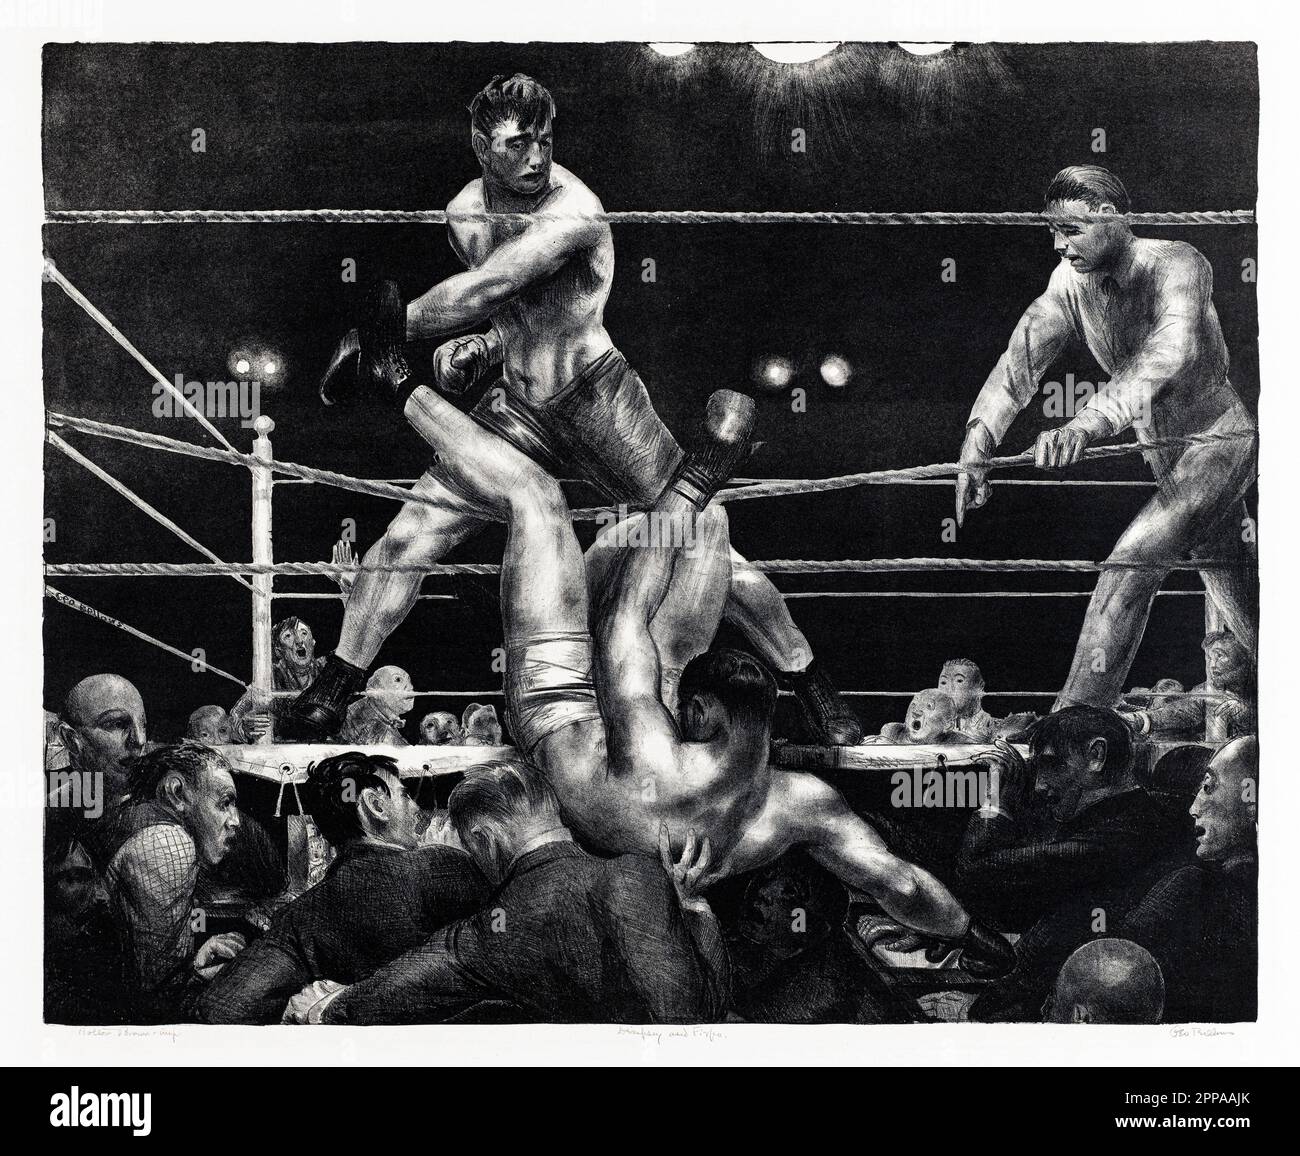 Dempsey and Firpo print in high resolution by George Wesley Bellows. Original from the Boston Public Library. Stock Photo